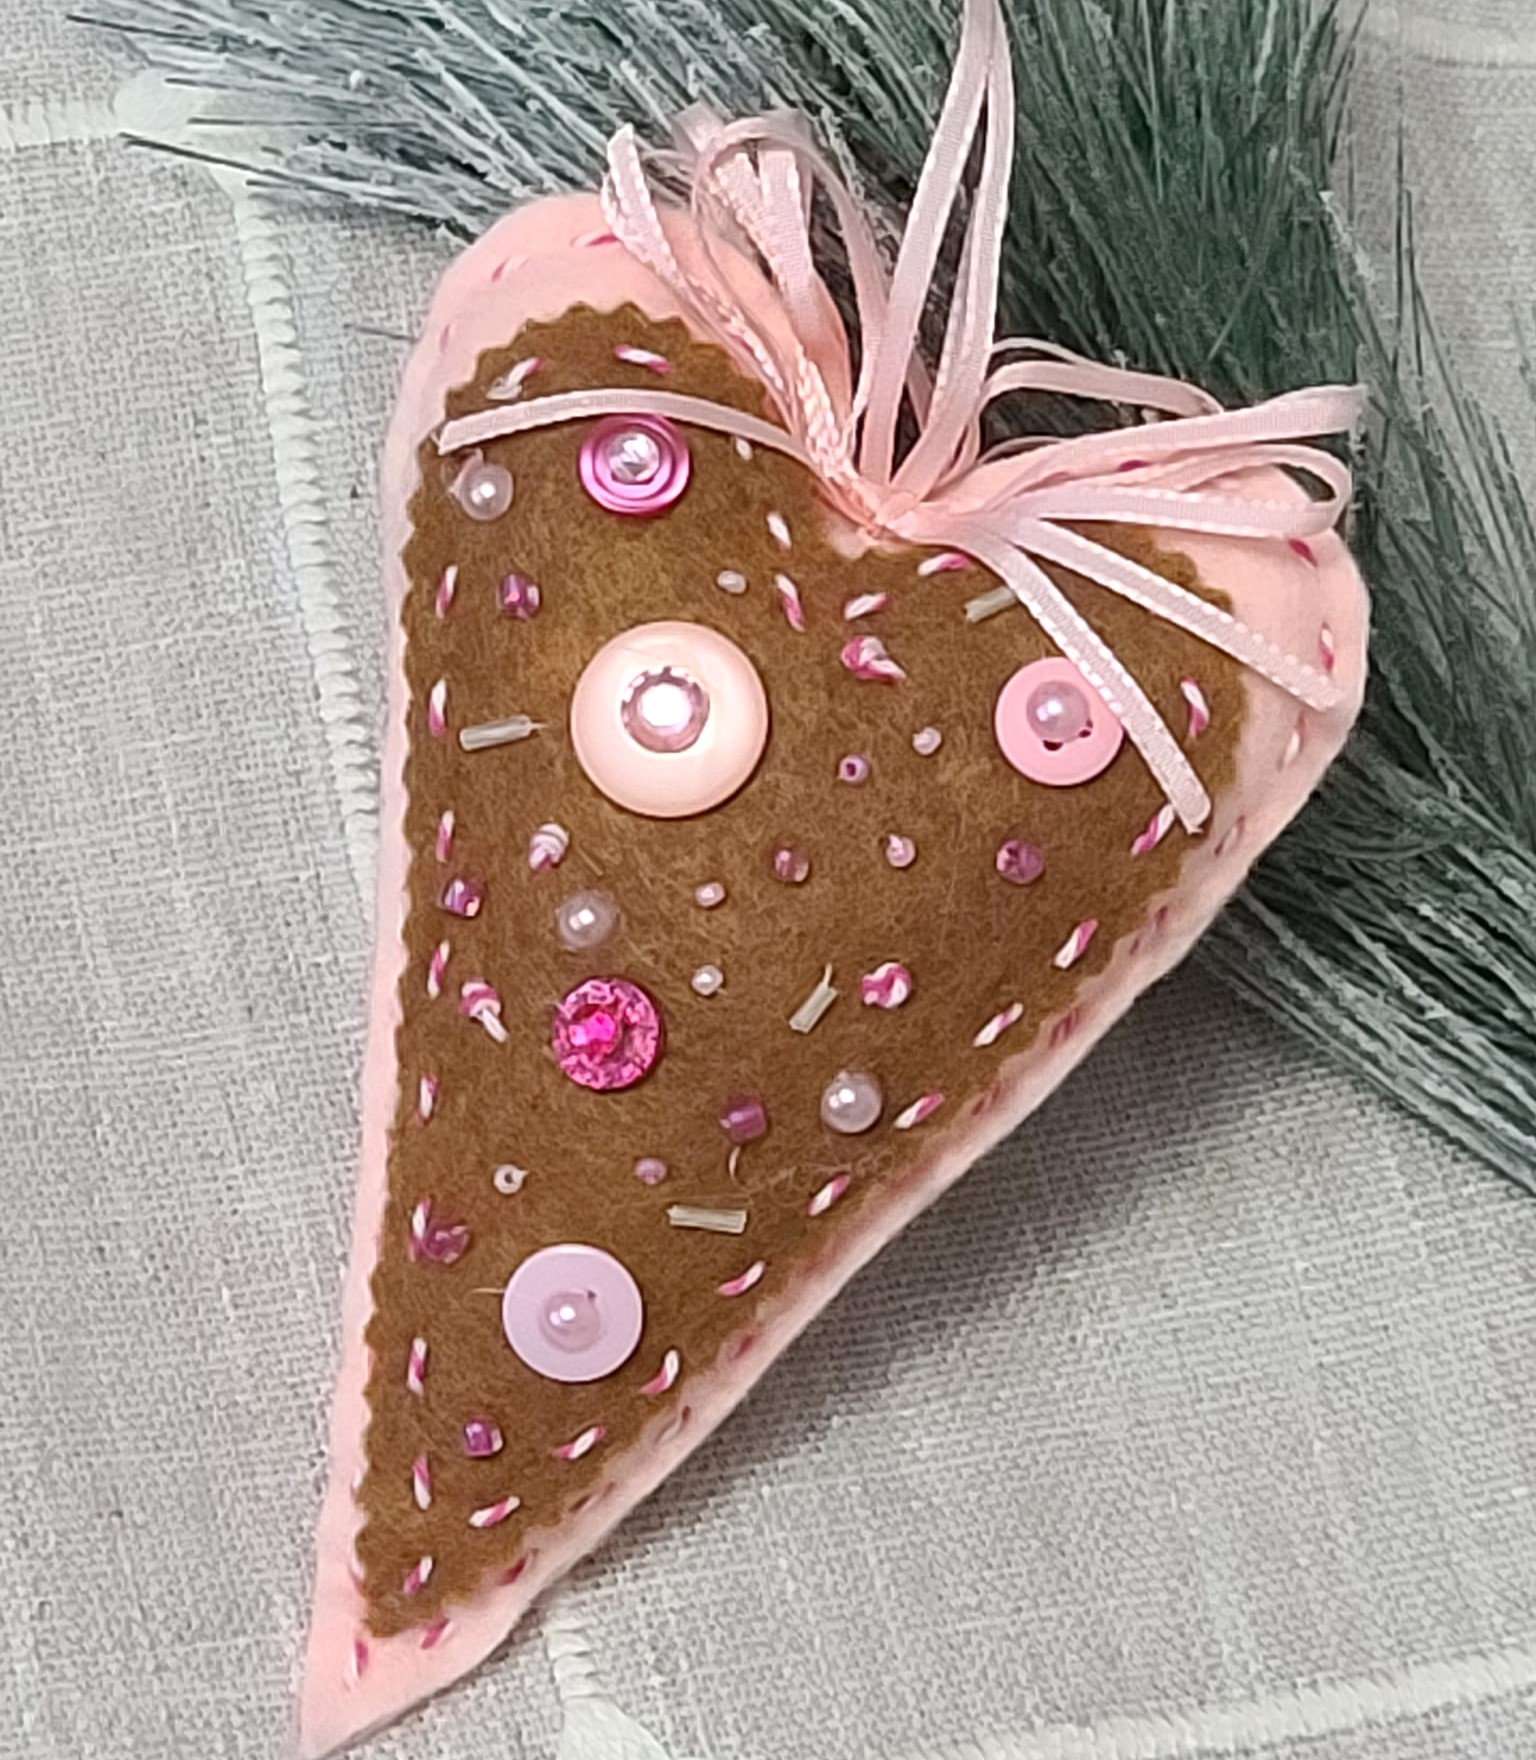 Felt and embroidery oblong heart ornament -Gingerbread Pink